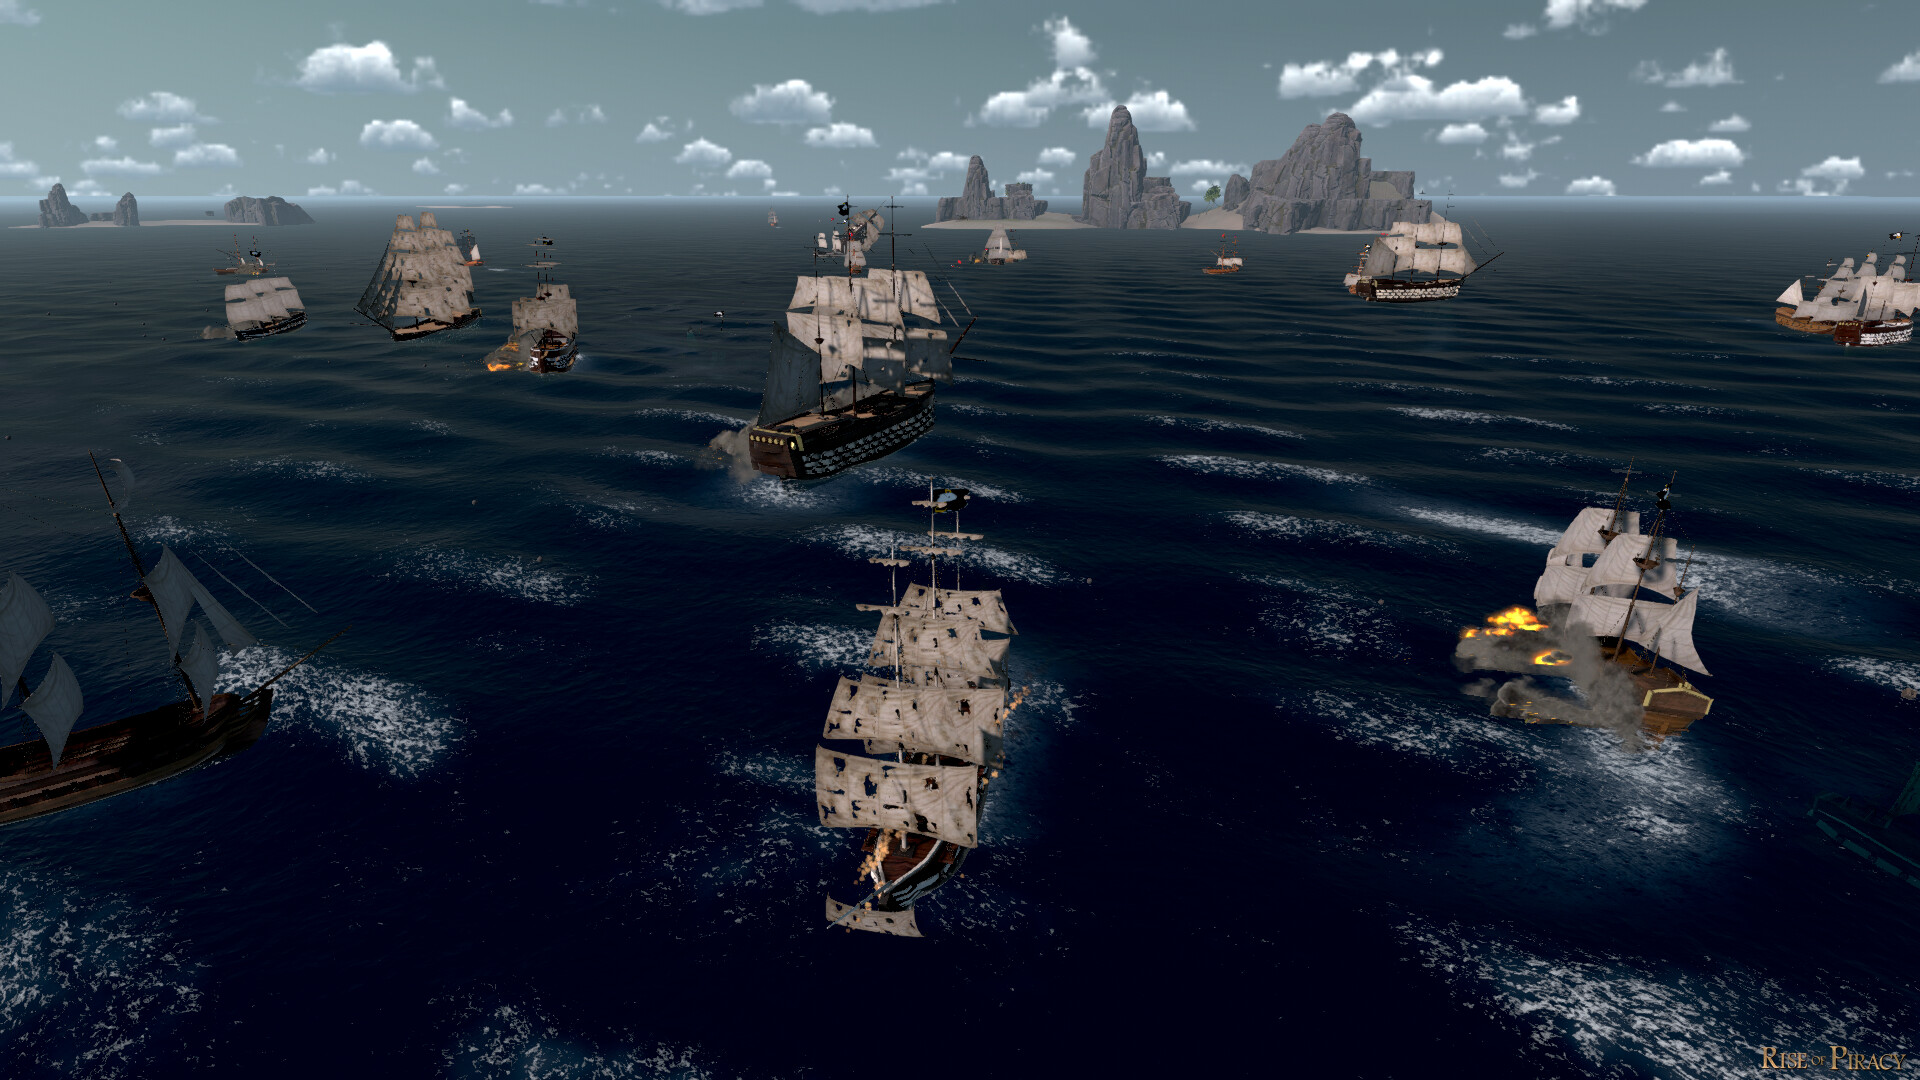 Corsairs Legacy - Pirate Action RPG & Sea Battles on Steam